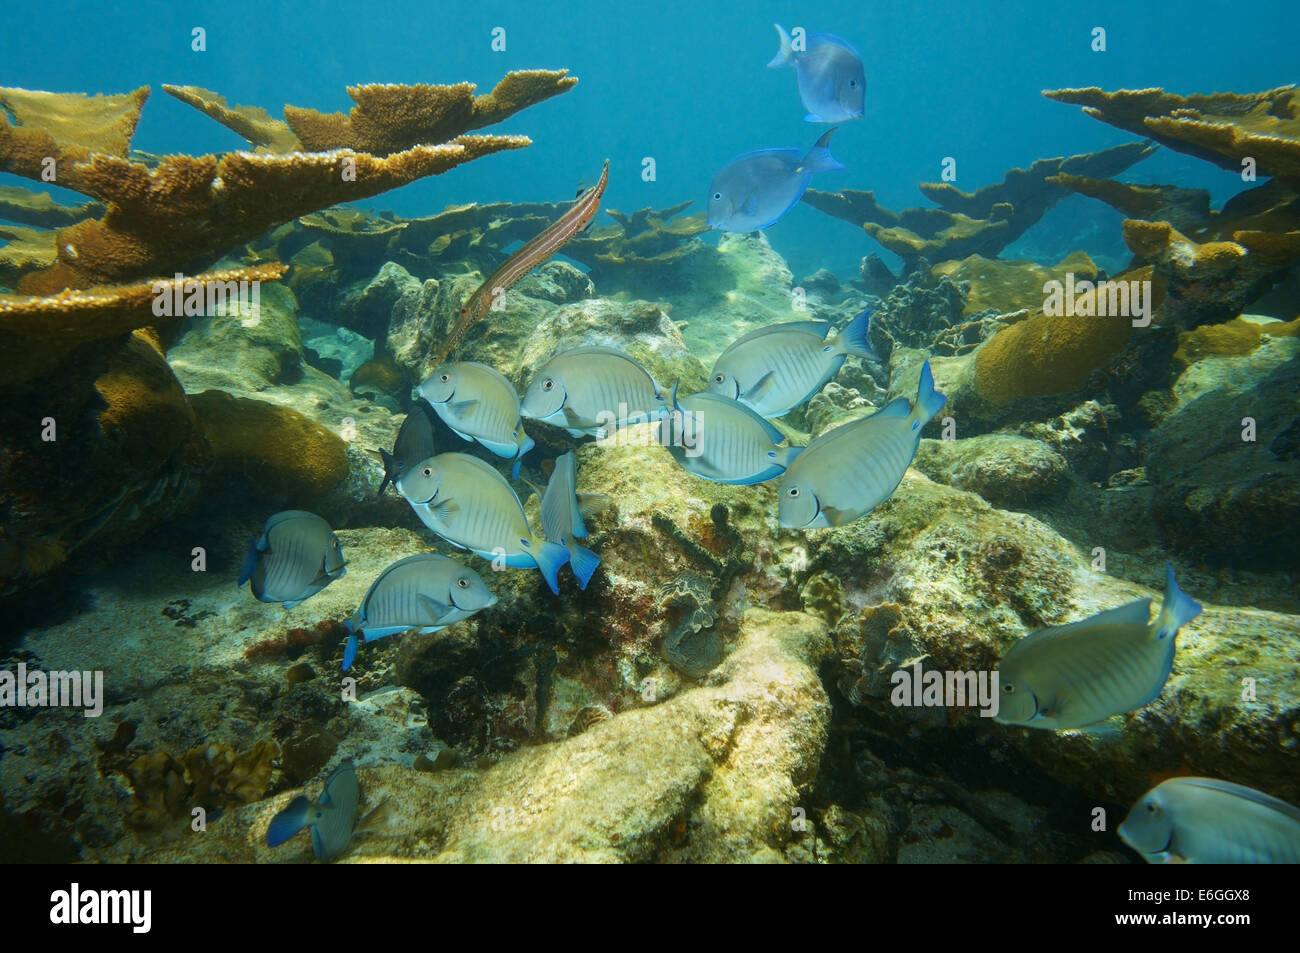 fish school of Doctorfish tang in a coral reef of the Caribbean sea Stock Photo